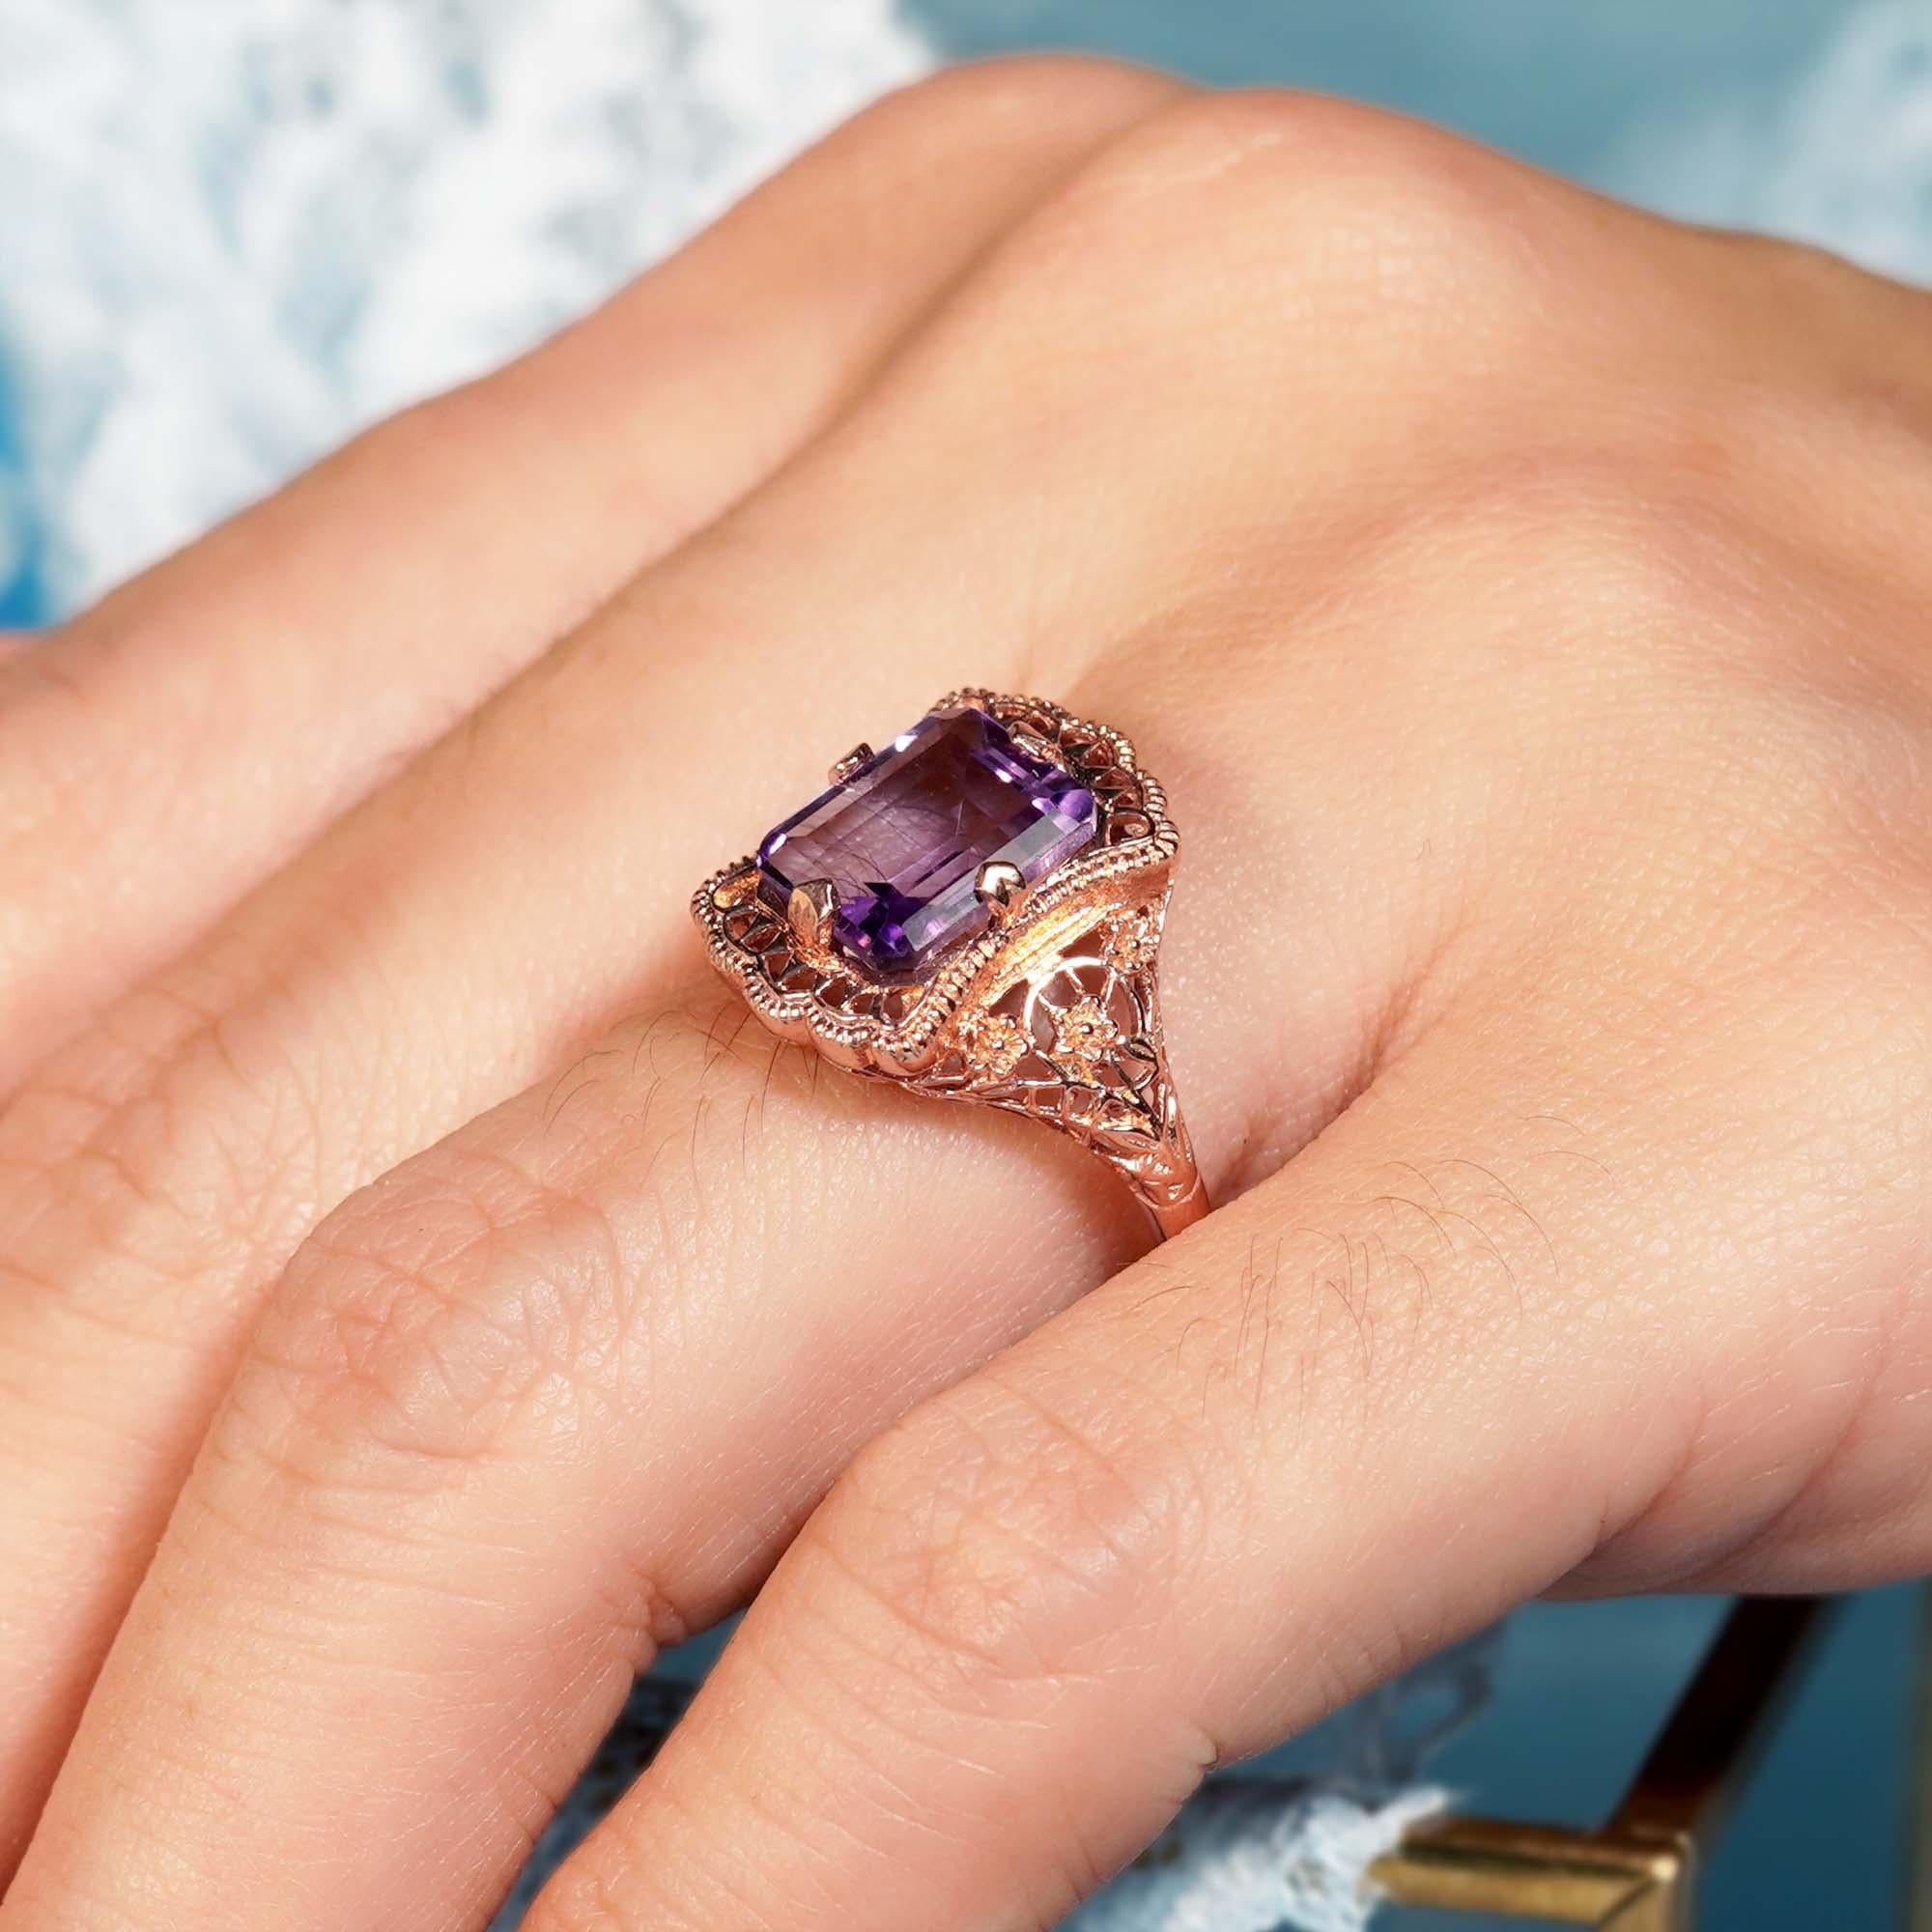 For Sale:  3.5 Ct. Amethyst Vintage Style Filigree Cocktail Ring in Solid 9K Rose Gold 10